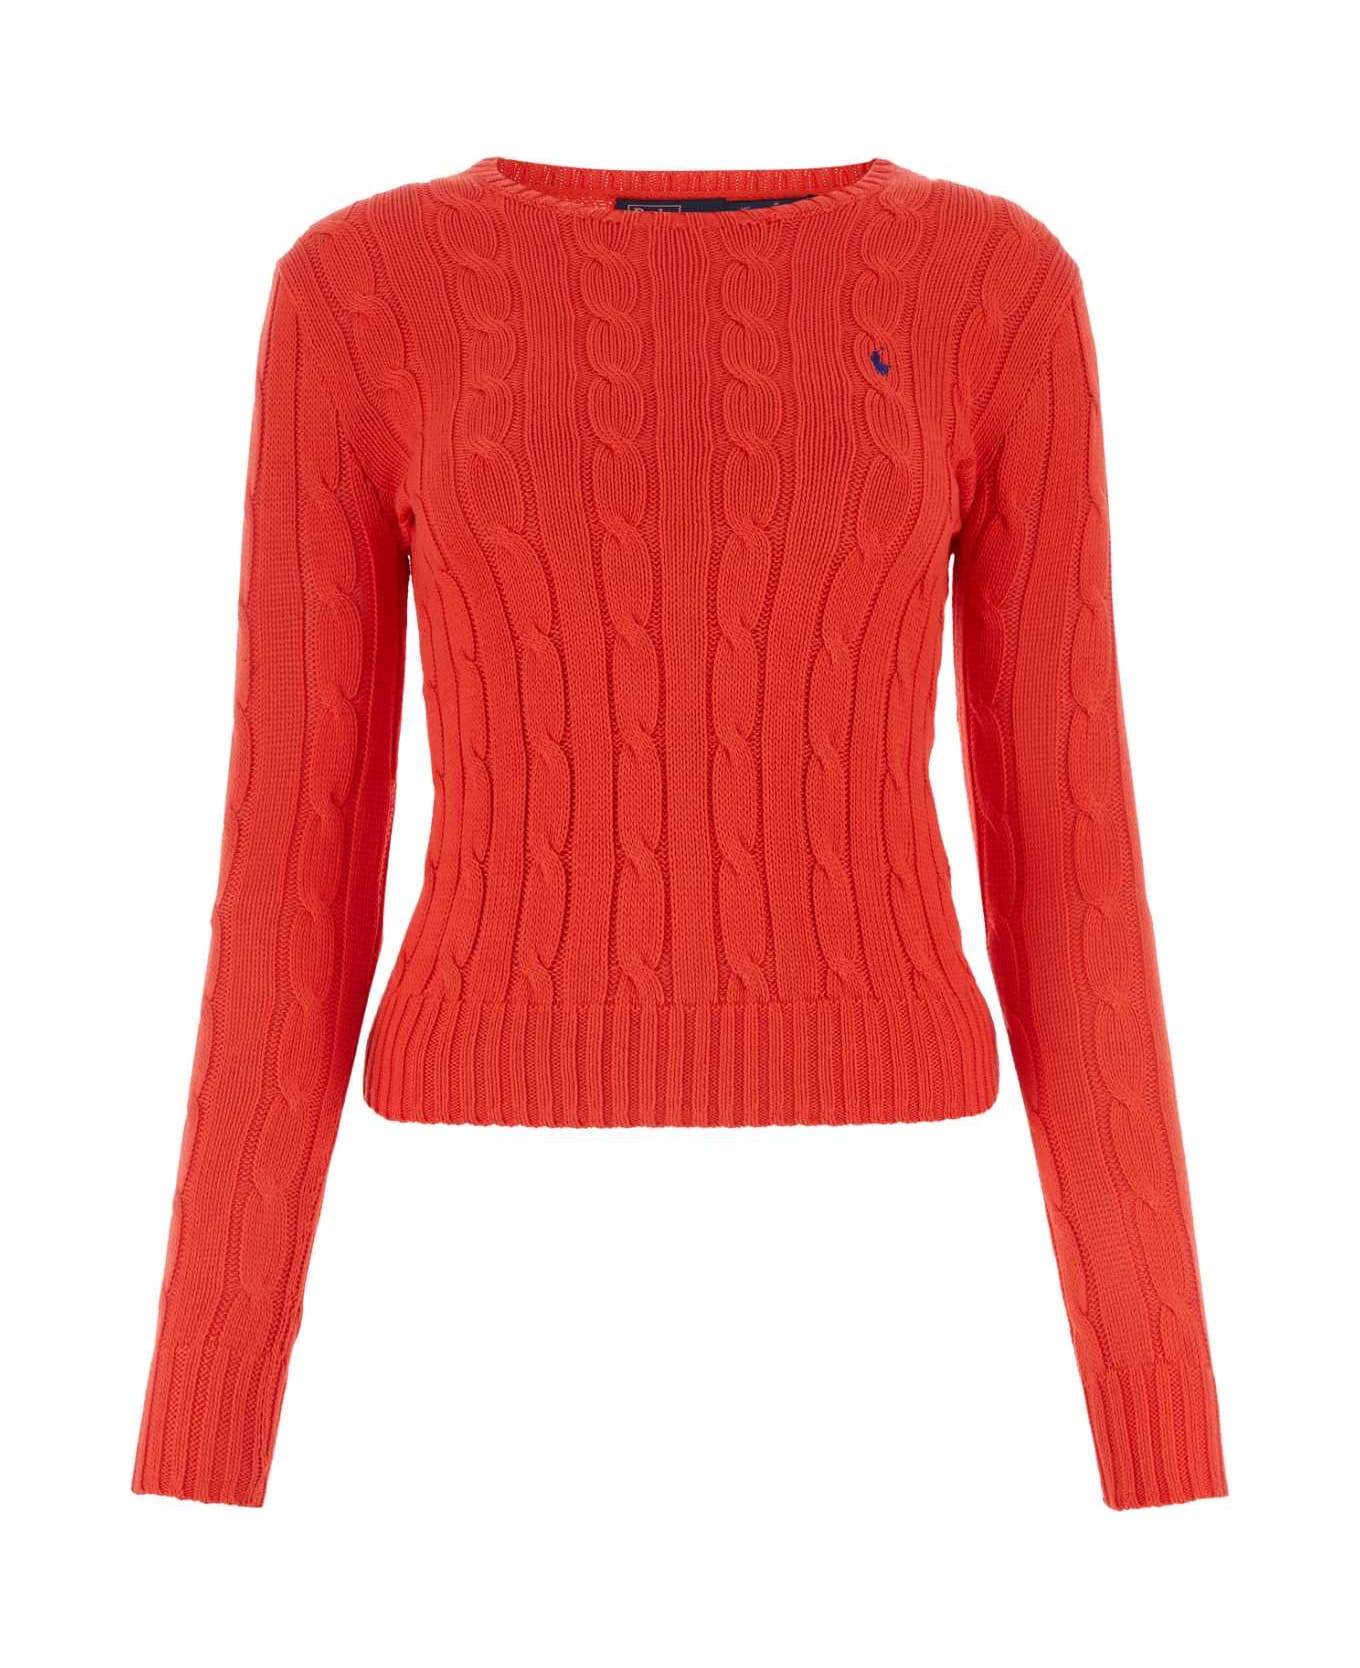 Polo Ralph Lauren Red Cotton Sweater - BRIGHTHIBISCUS